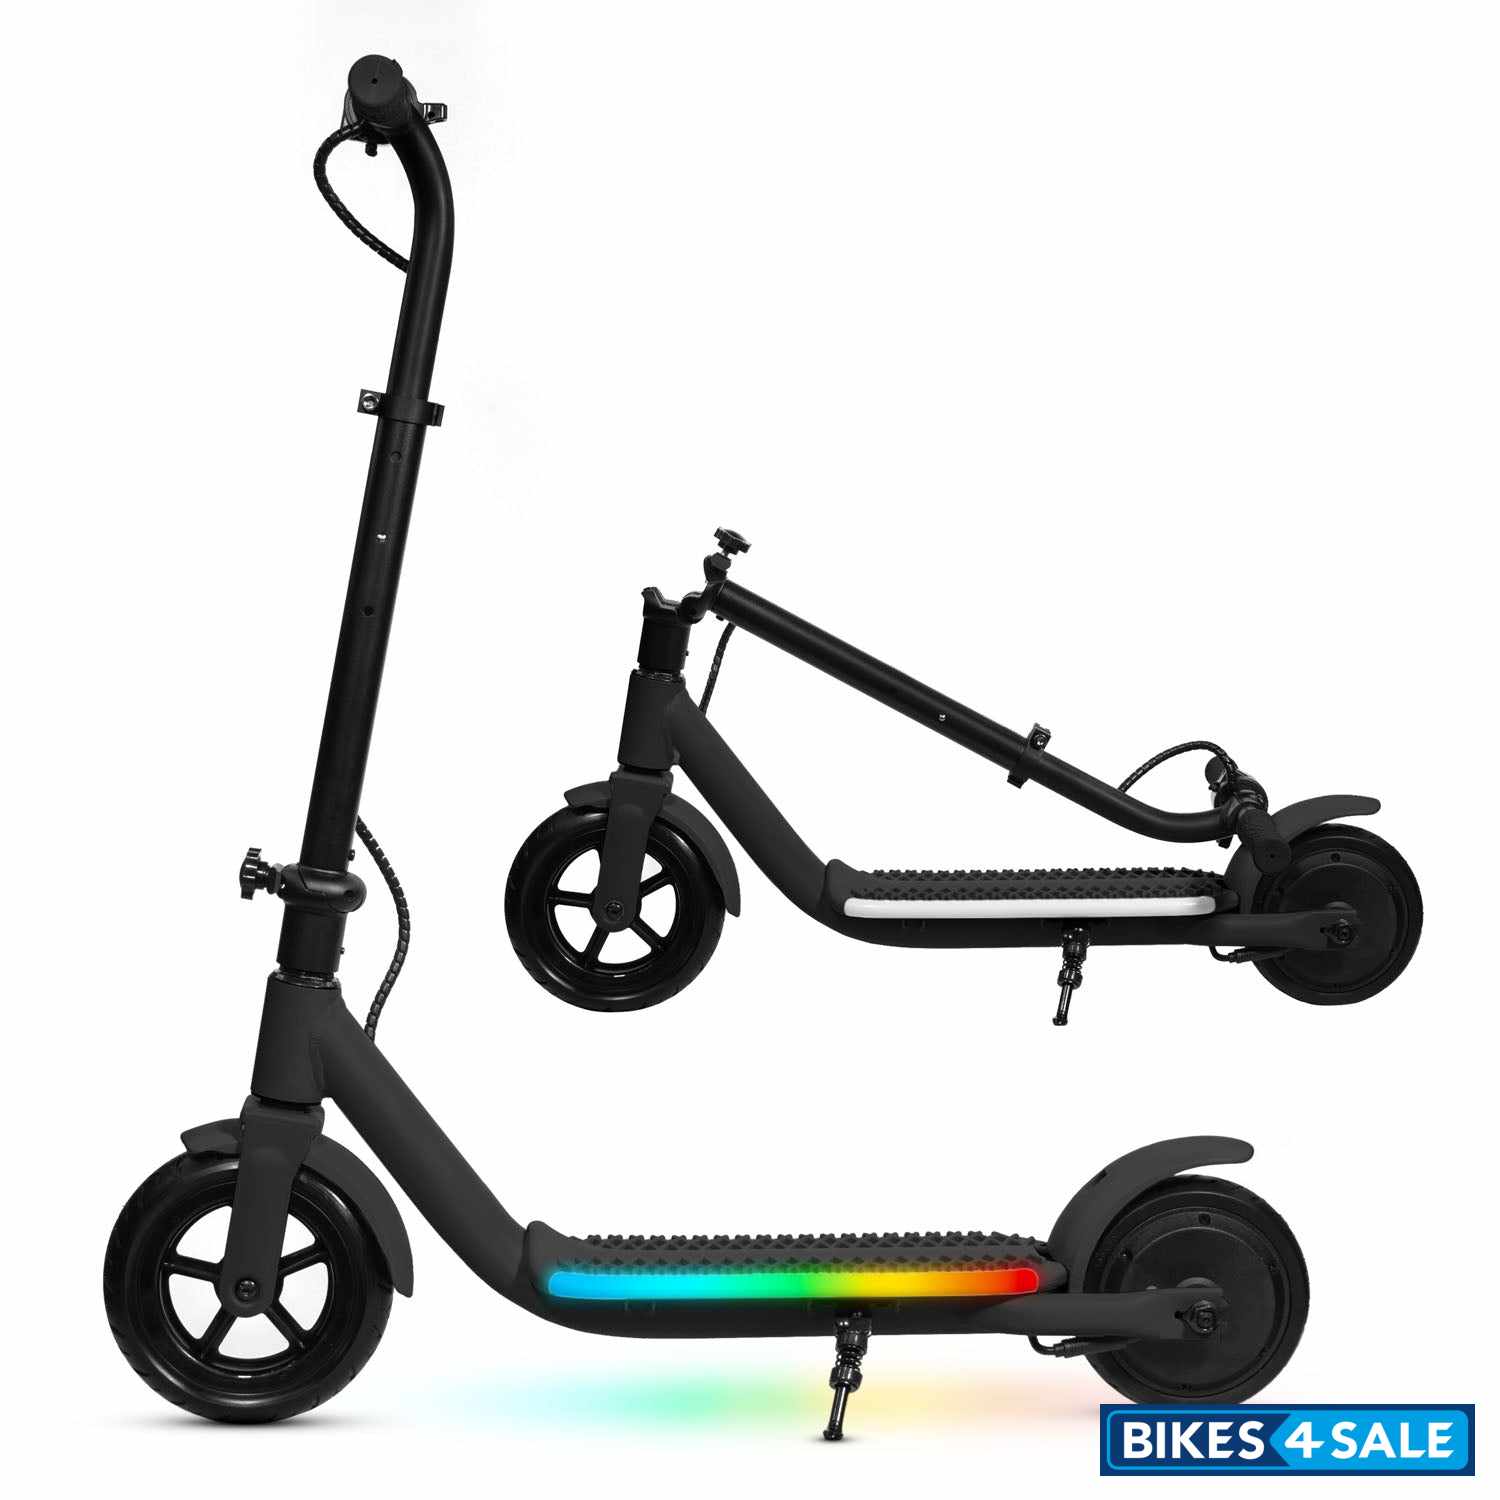 XPRIT FS04 Electric Scooter